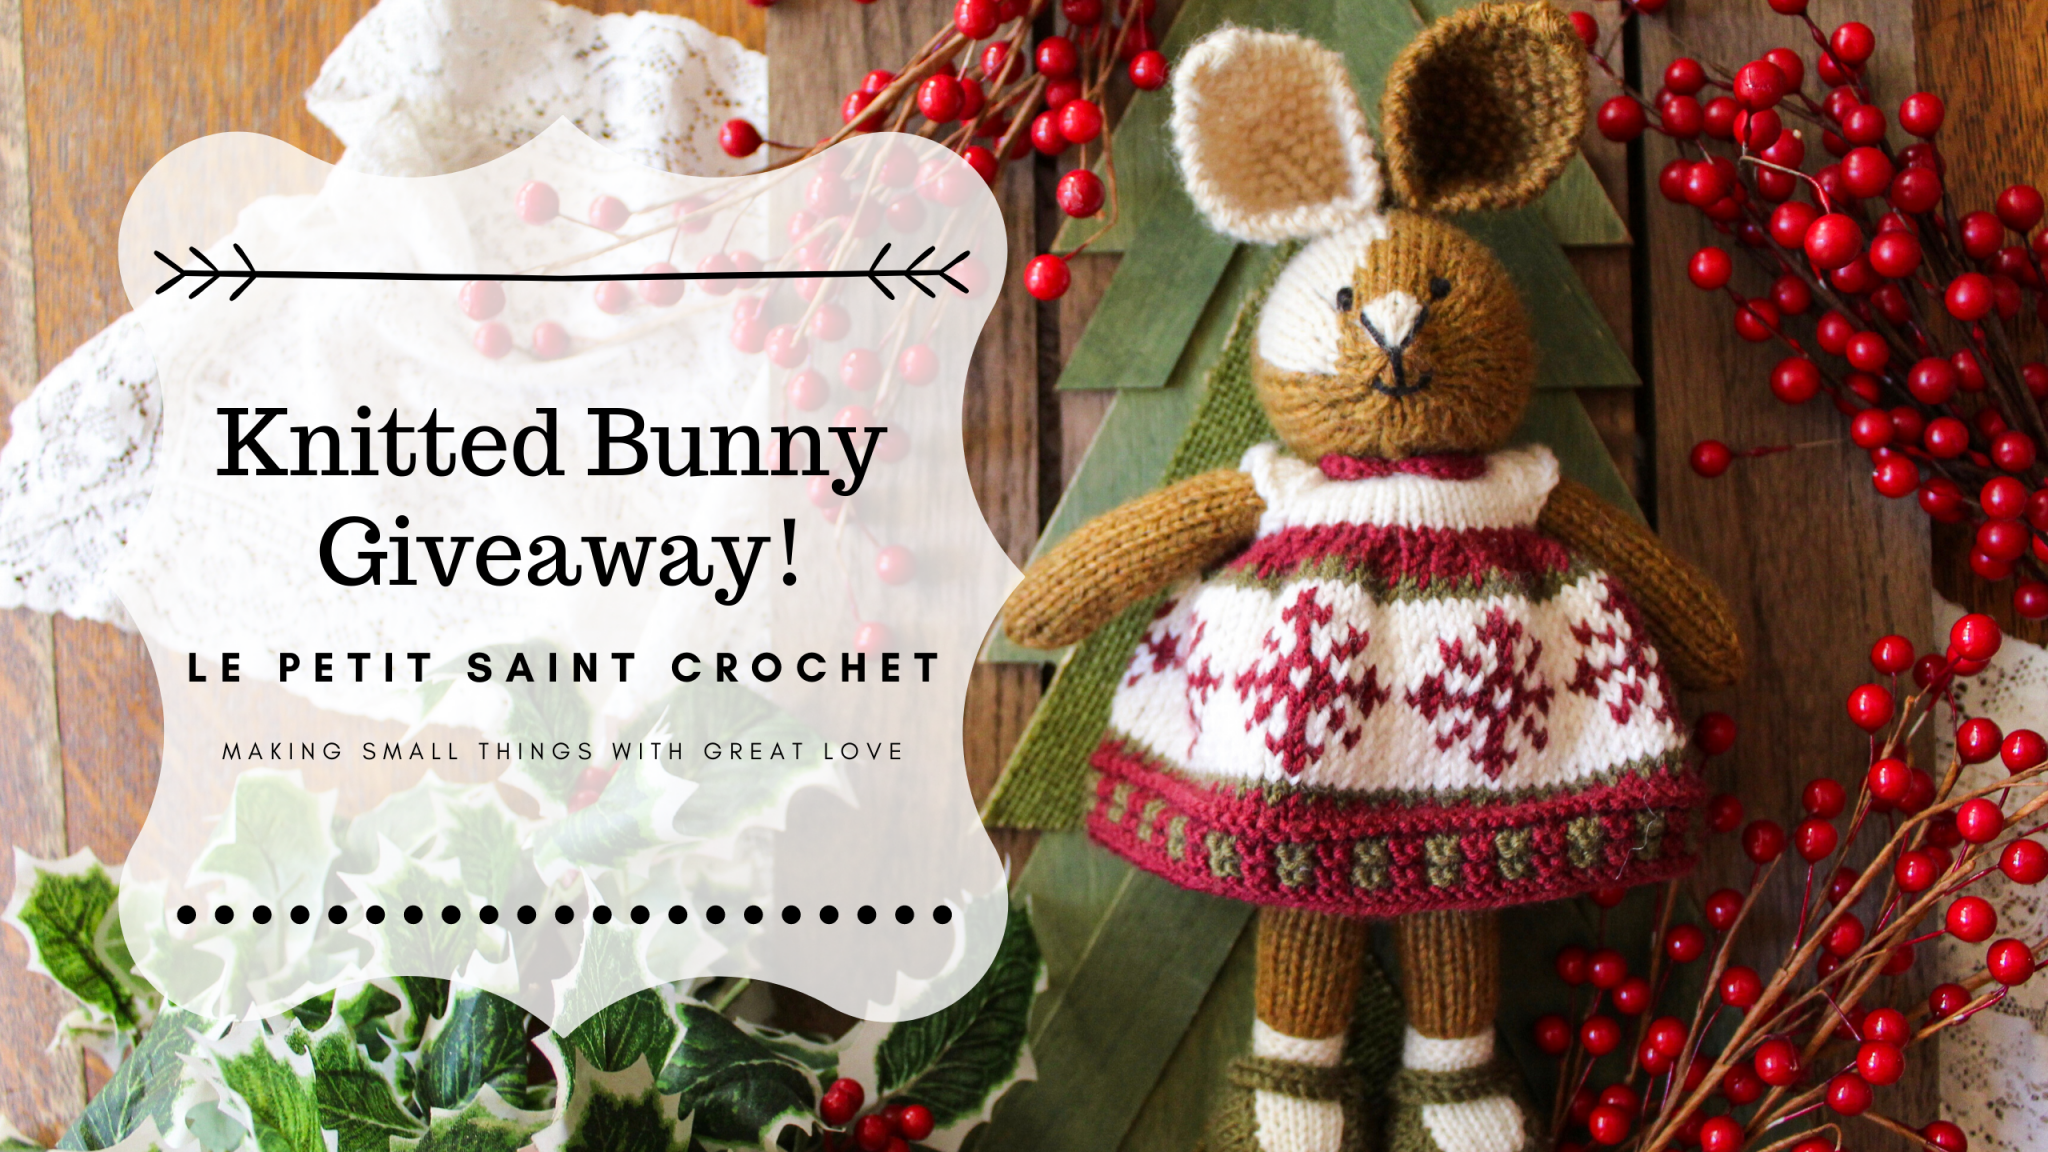 Knitted Bunny Giveaway!